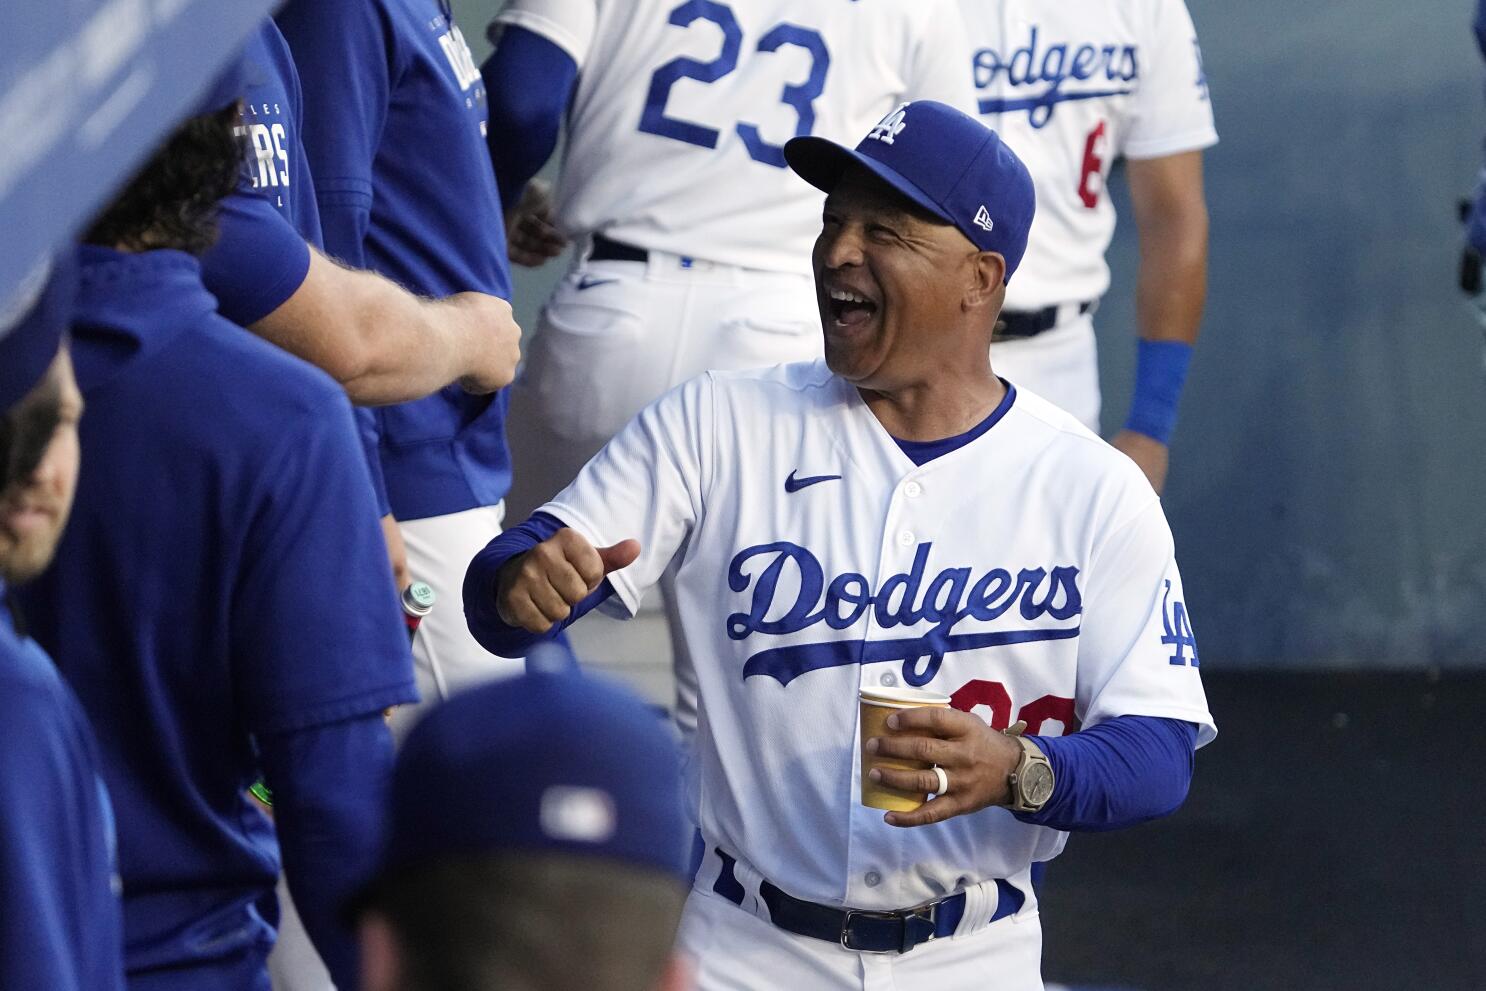 MLB awards races: Will Dodgers' manager Dave Roberts again be overlooked?